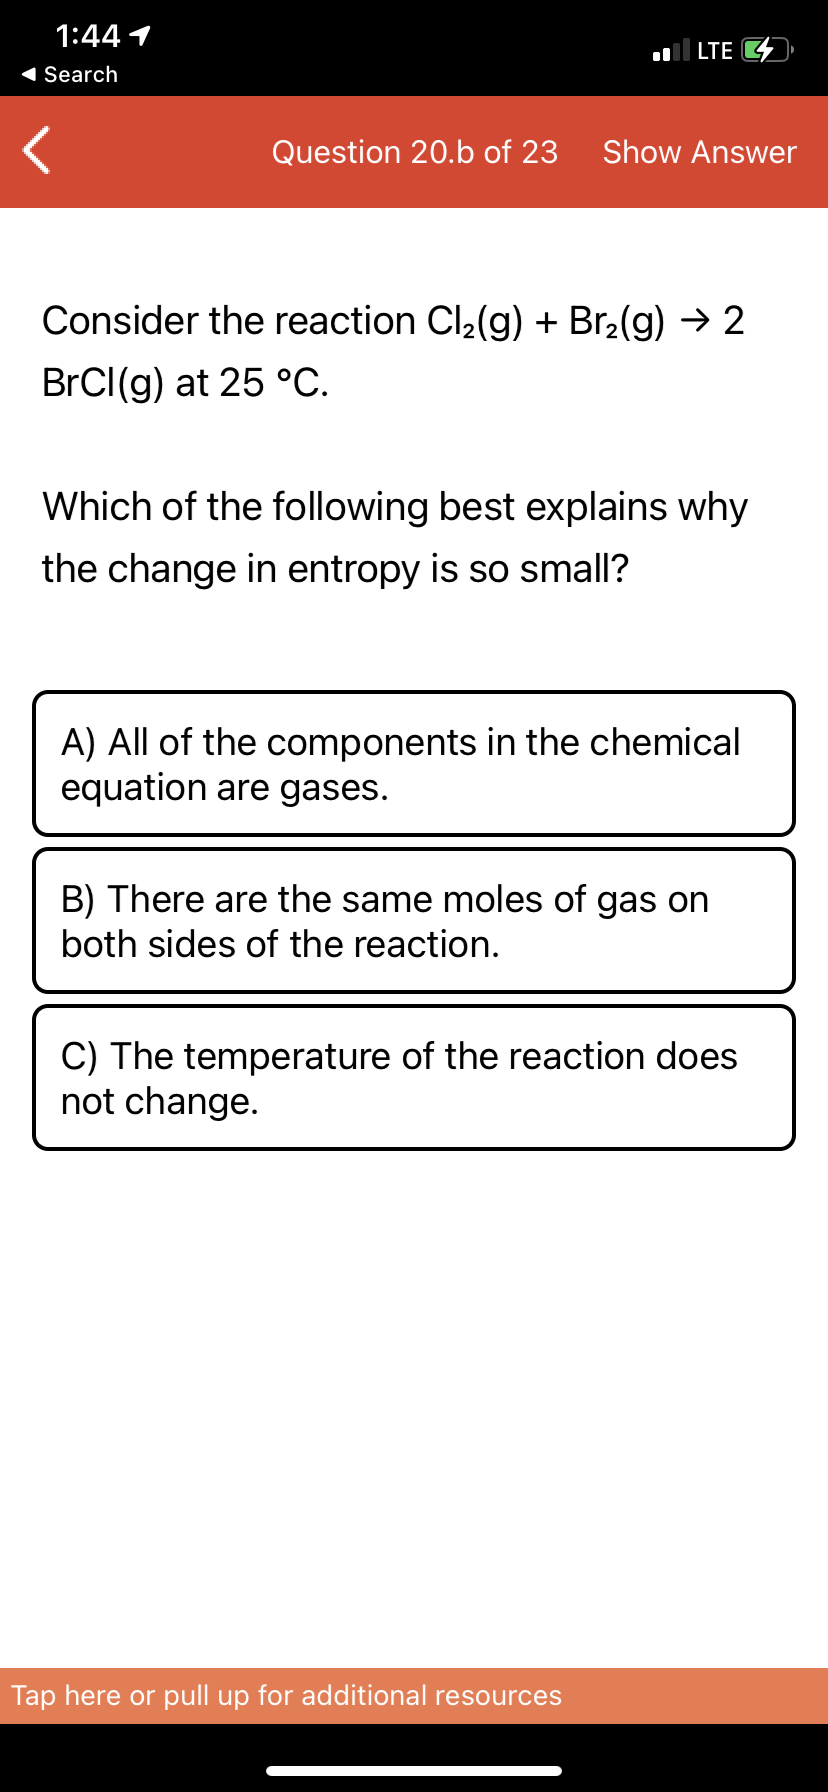 1:44 1
LTE 4
1 Search
Question 20.b of 23
Show Answer
Consider the reaction Cl2(g) + Br2(g) → 2
BrCI(g) at 25 °C.
Which of the following best explains why
the change in entropy is so small?
A) All of the components in the chemical
equation are gases.
B) There are the same moles of gas on
both sides of the reaction.
C) The temperature of the reaction does
not change.
Tap here or pull up for additional resources
